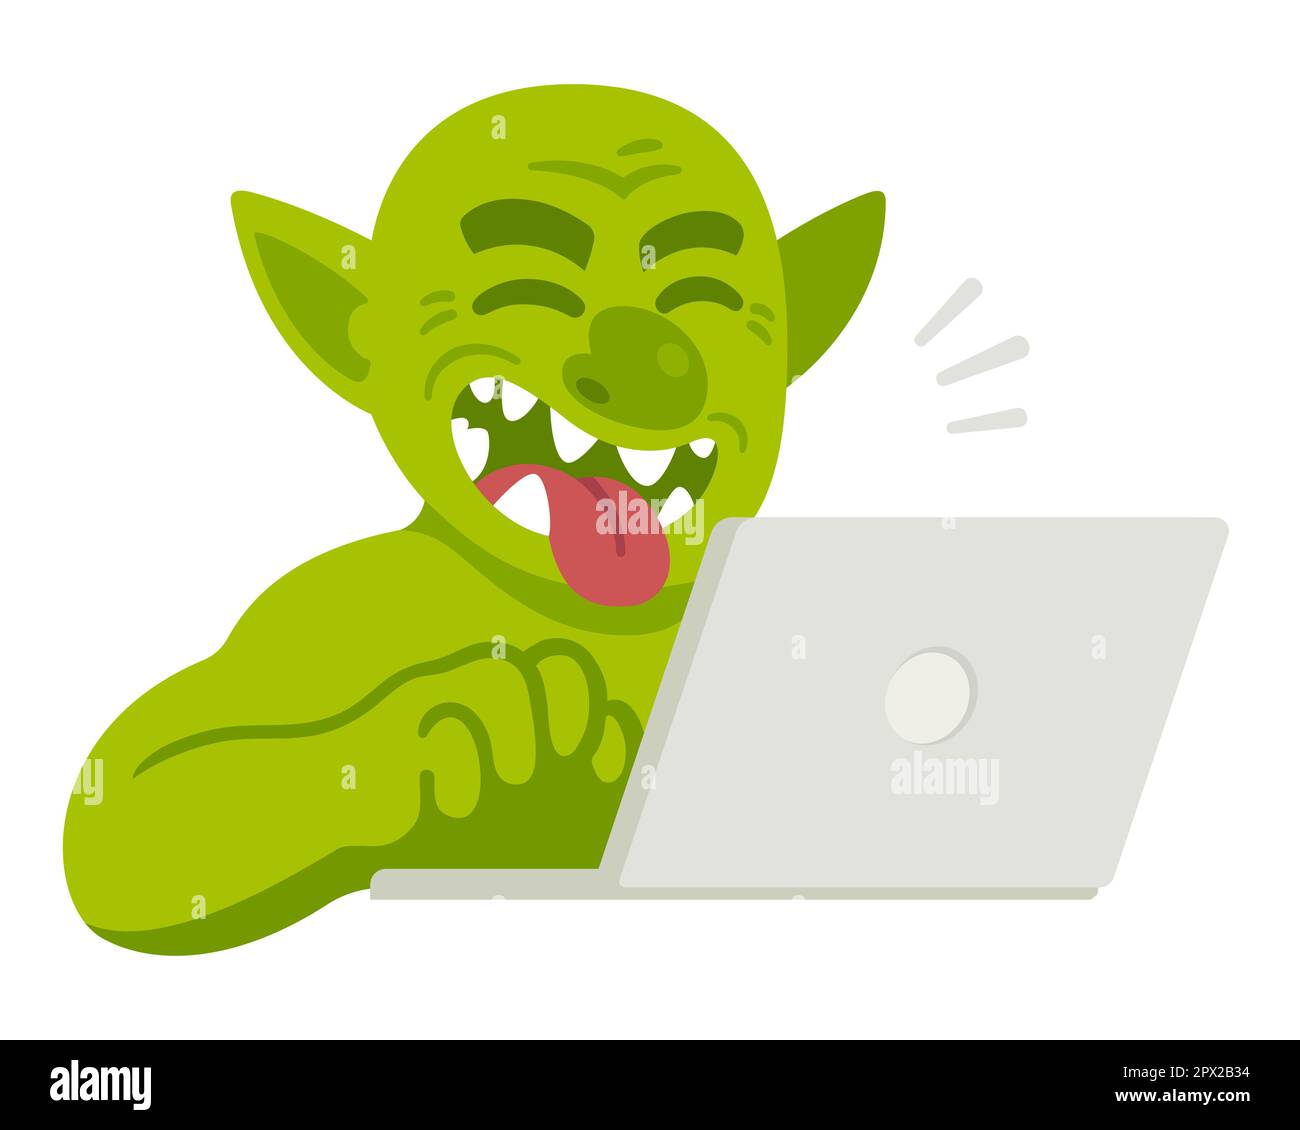 Cartoon internet troll typing comment on laptop, laughing with tongue sticking out. Funny vector illustration of trolling or cyberbullying. Stock Vector